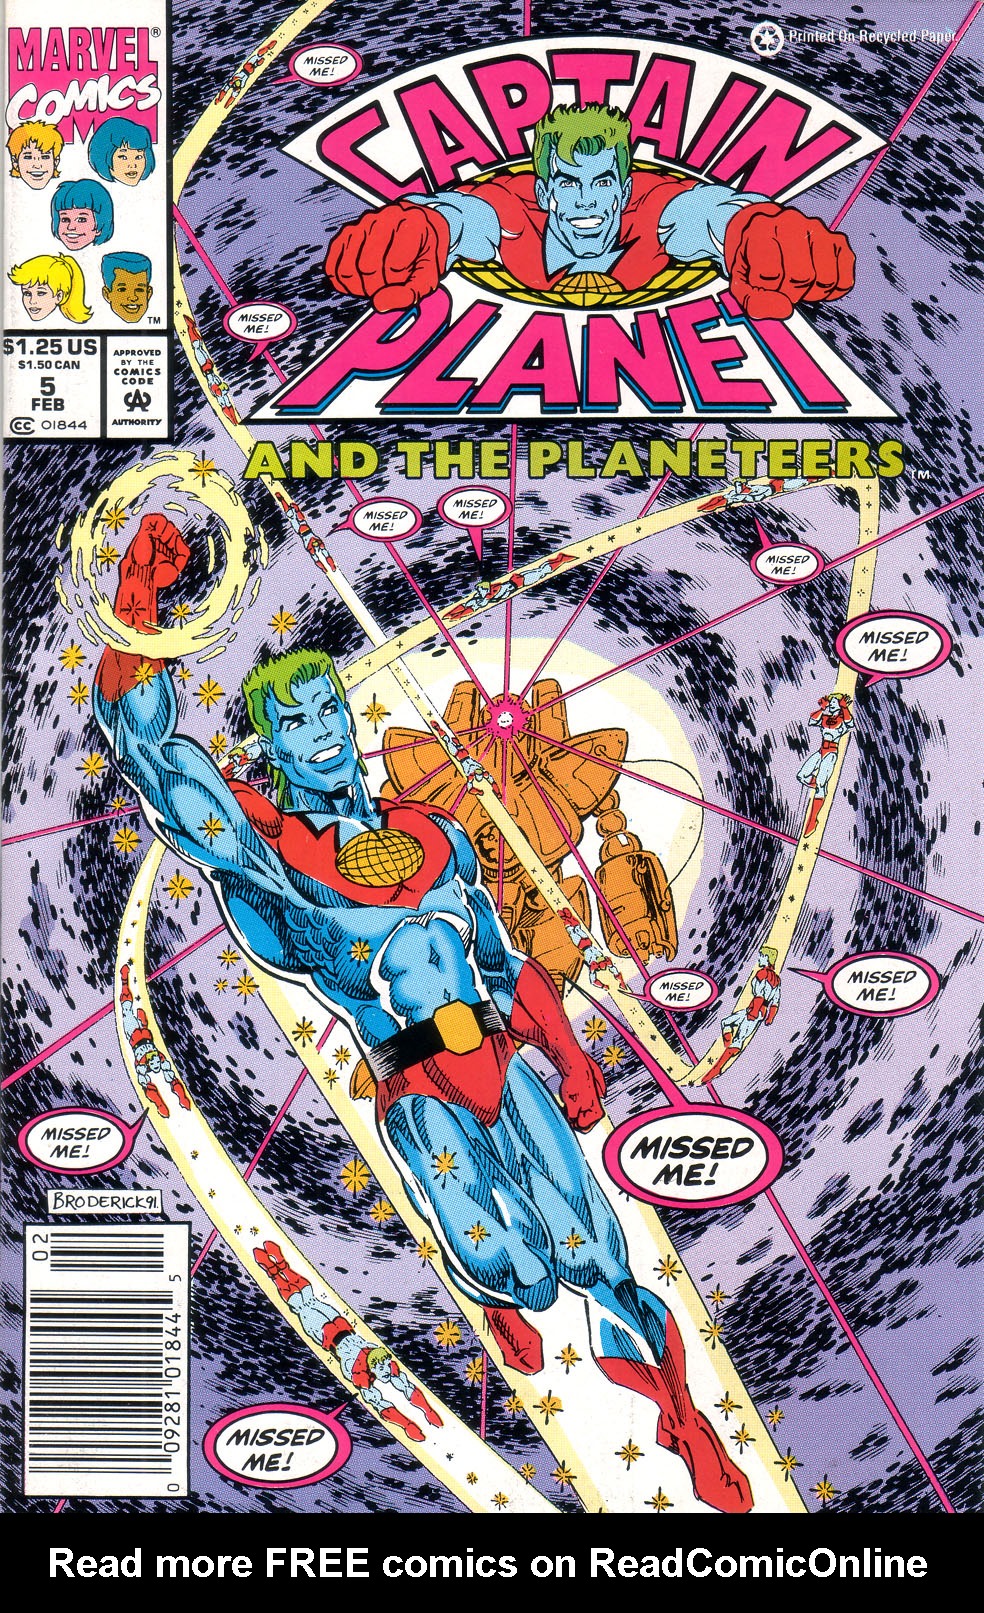 Captain Planet And The Planeteers Issue 5 | Read Captain Planet And The  Planeteers Issue 5 comic online in high quality. Read Full Comic online for  free - Read comics online in